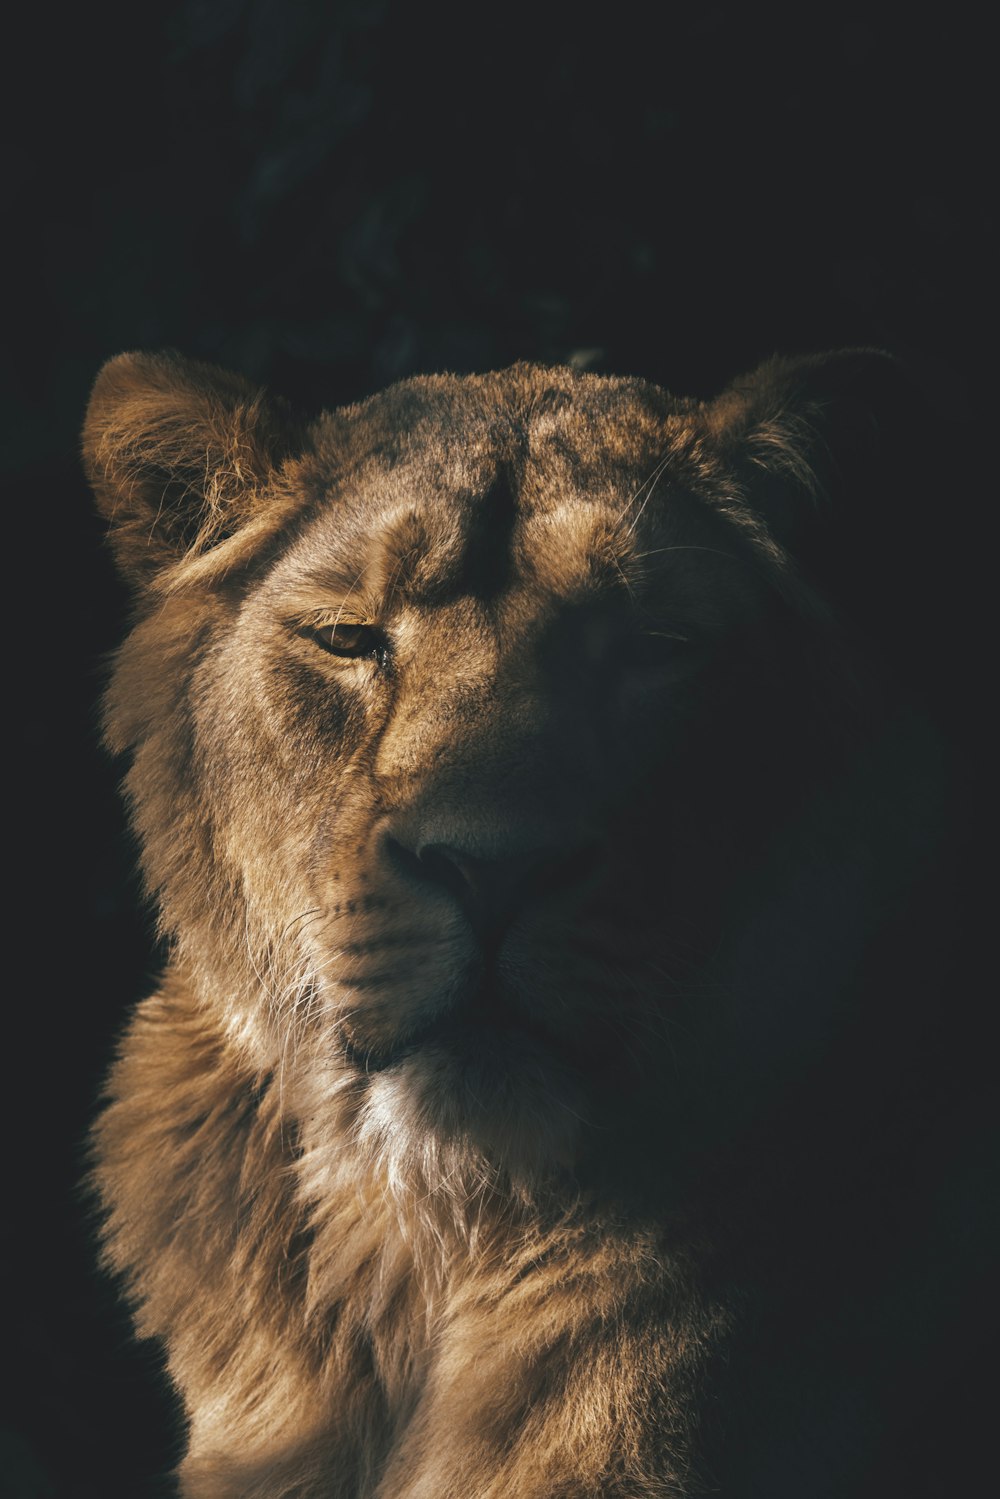 a close up of a lion in the dark